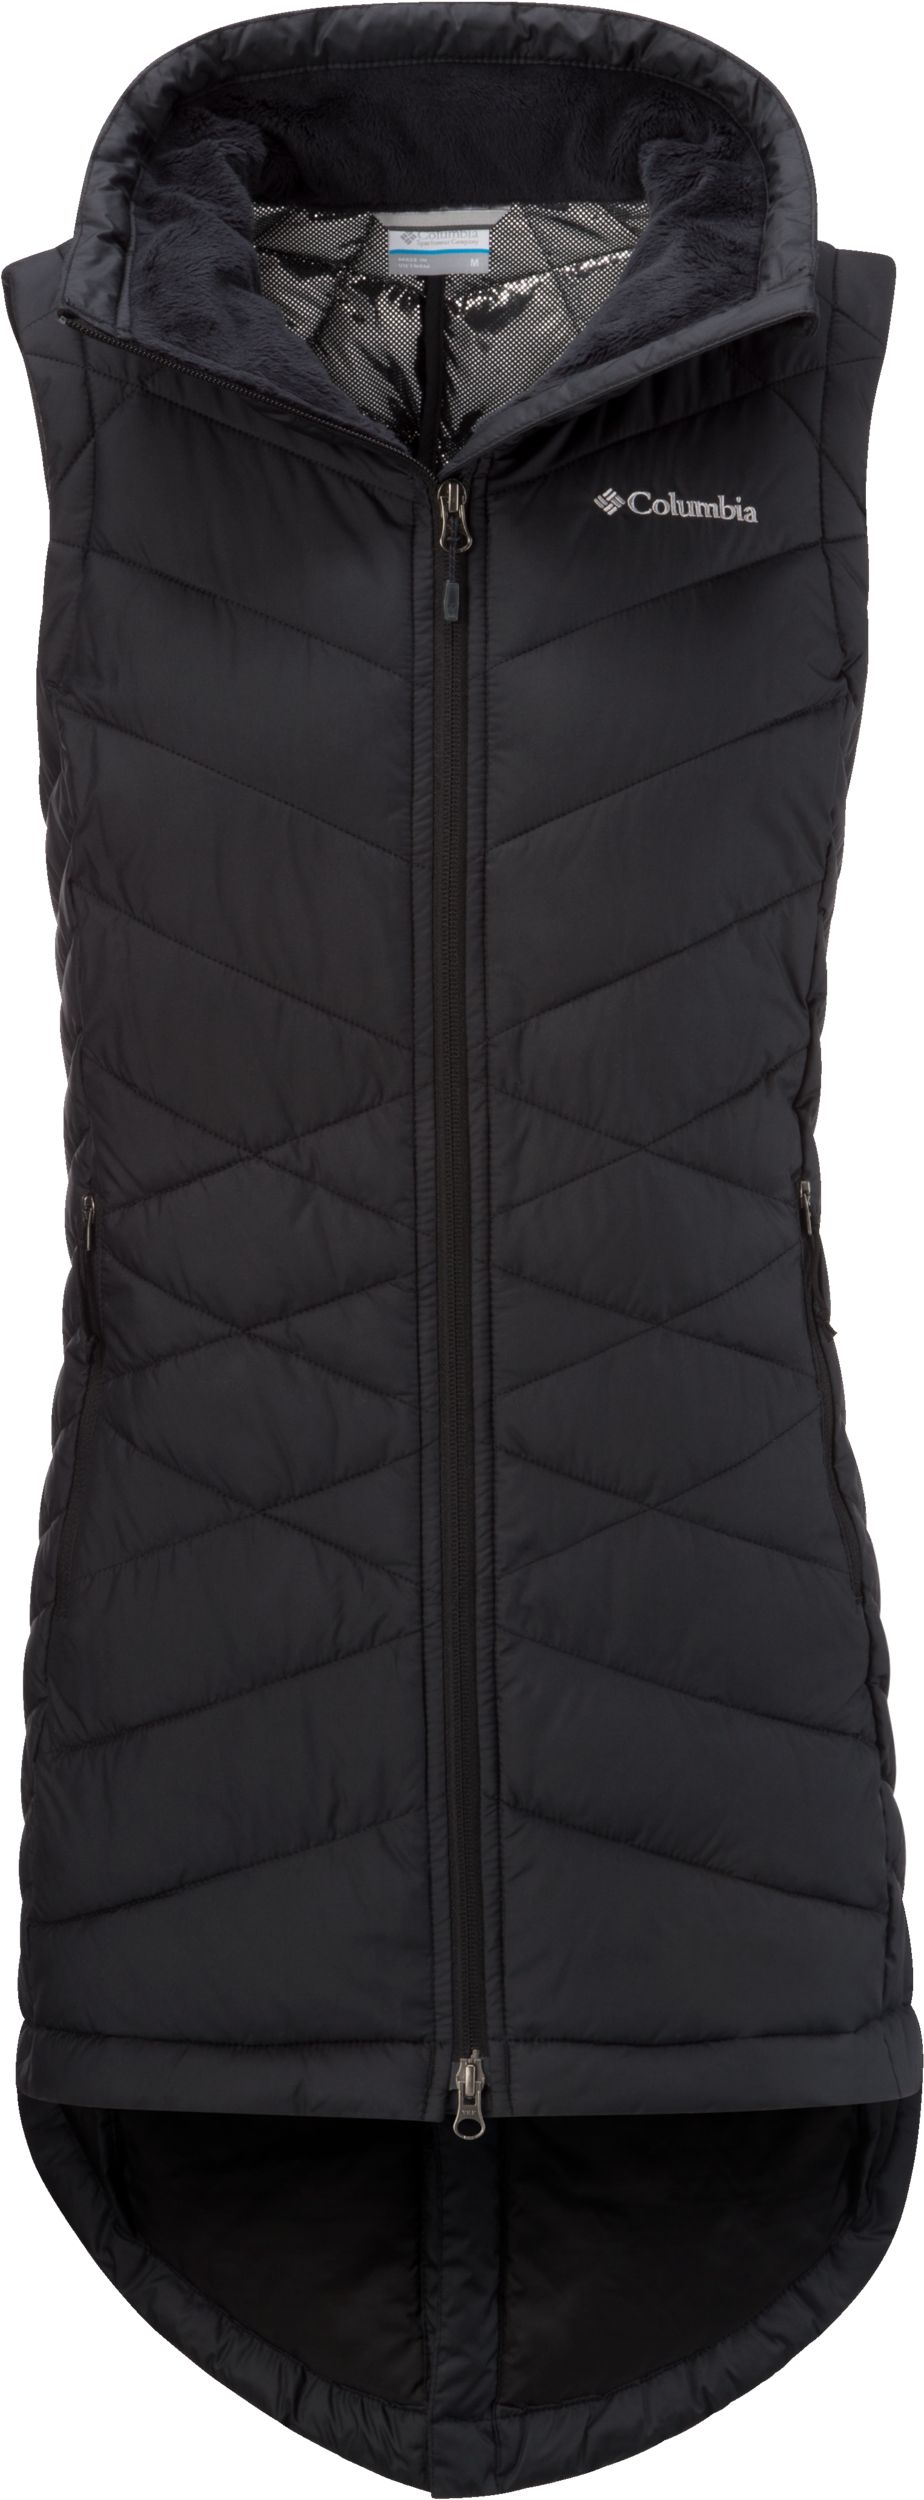 Columbia Women's Heavenly Vest Insulated Semi-Fitted Winter Long